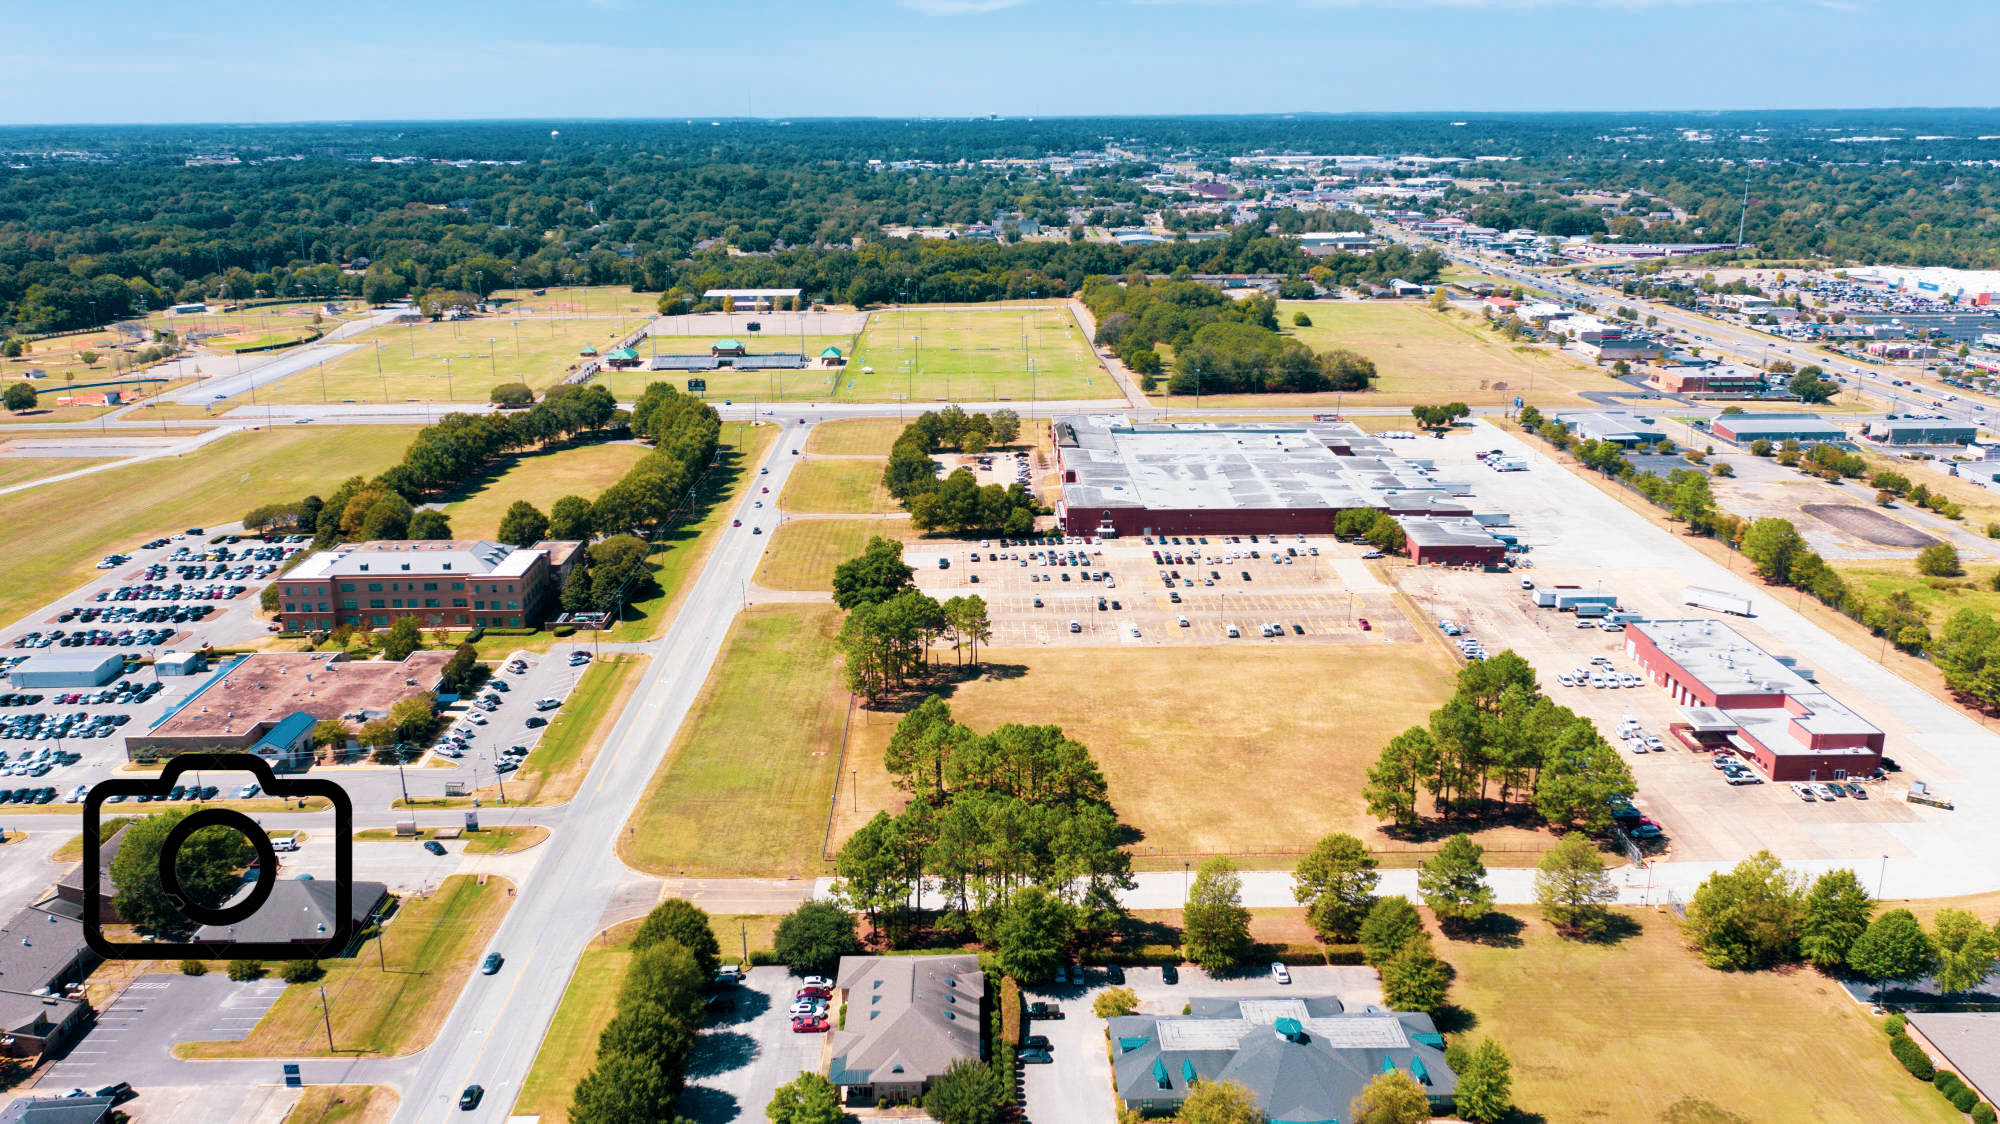 Aerial View of Commercial Real Estate